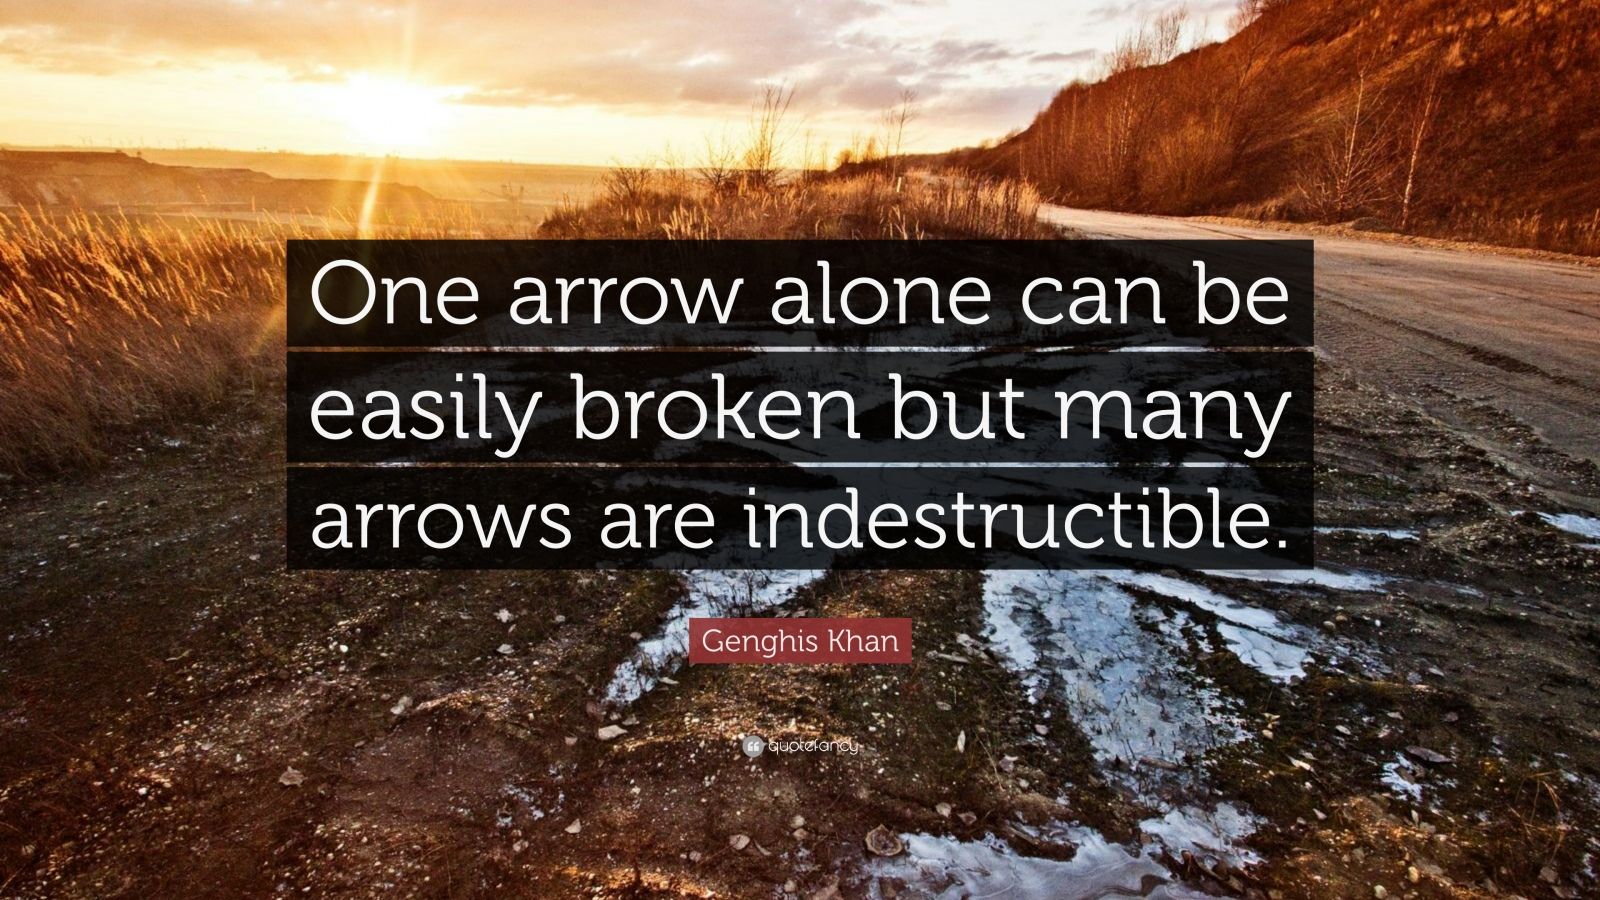 Genghis Khan Quote: “One arrow alone can be easily broken but many